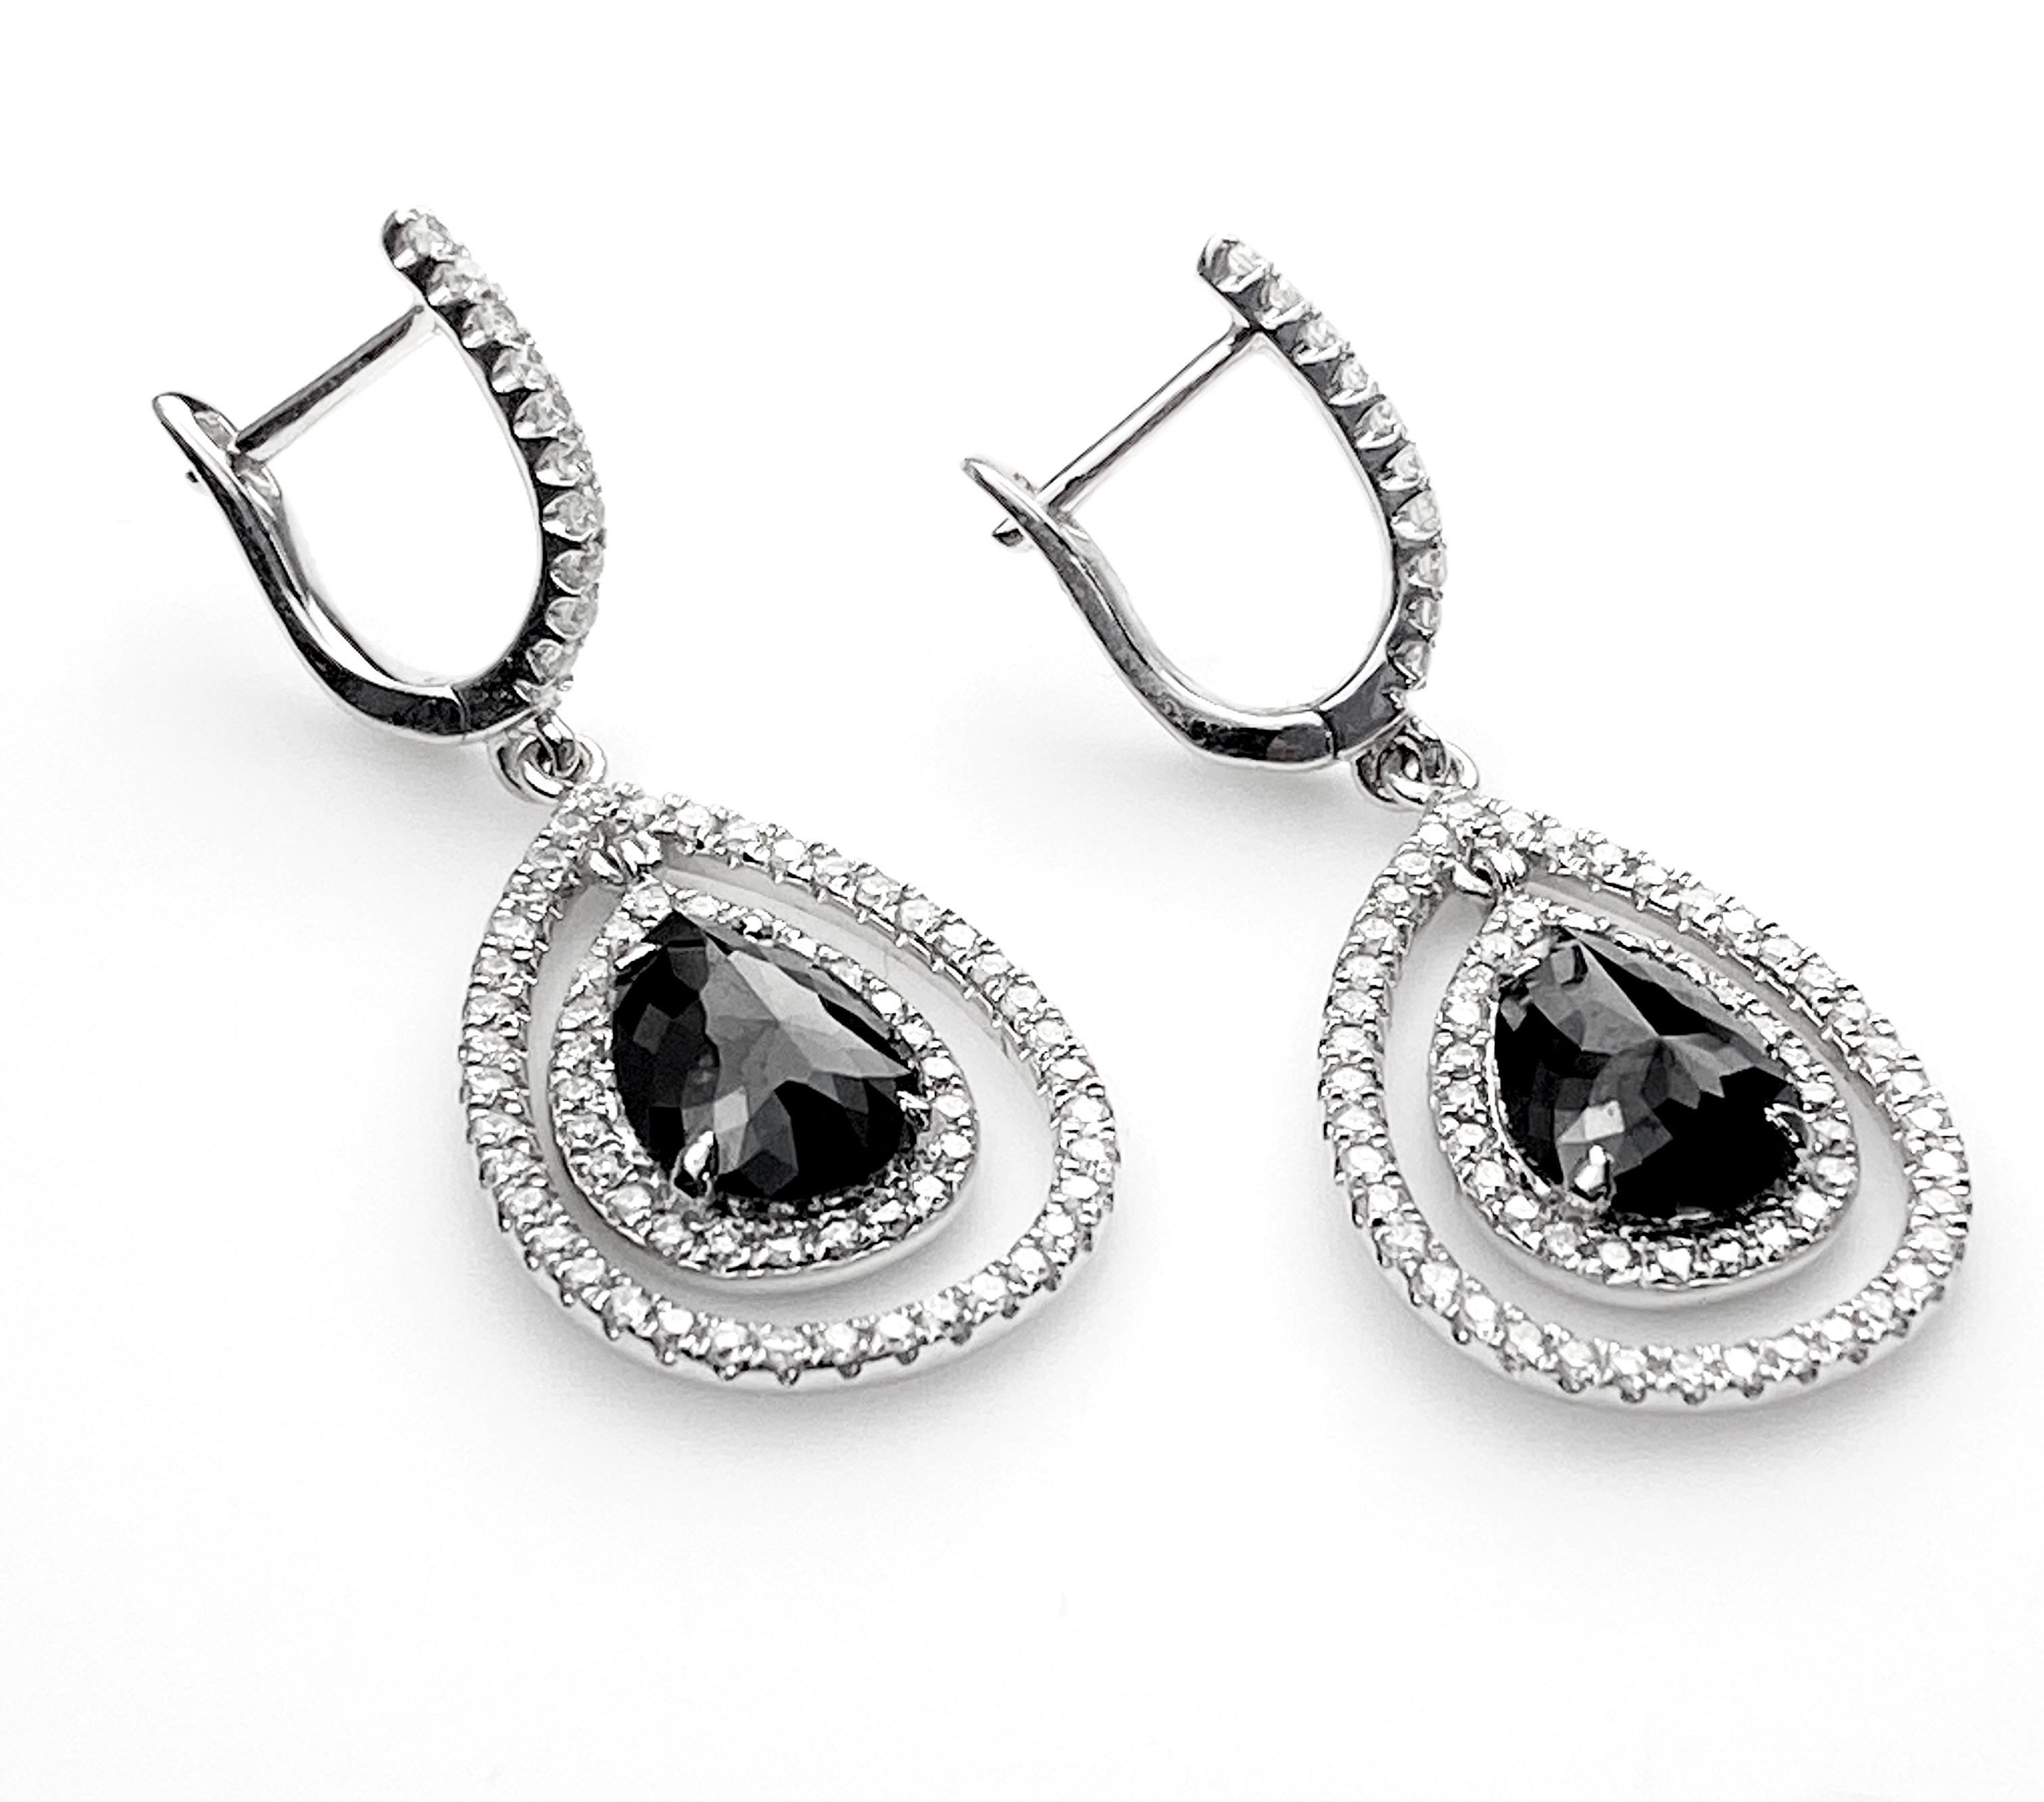 Elegant drop earrings featuring two pear-cut black diamonds equal 3.09ct total. Surrounded by a double halo of 0.78ct total of round brilliant white diamonds. Completed with post and hinge closures on 14kt white gold lever backings.